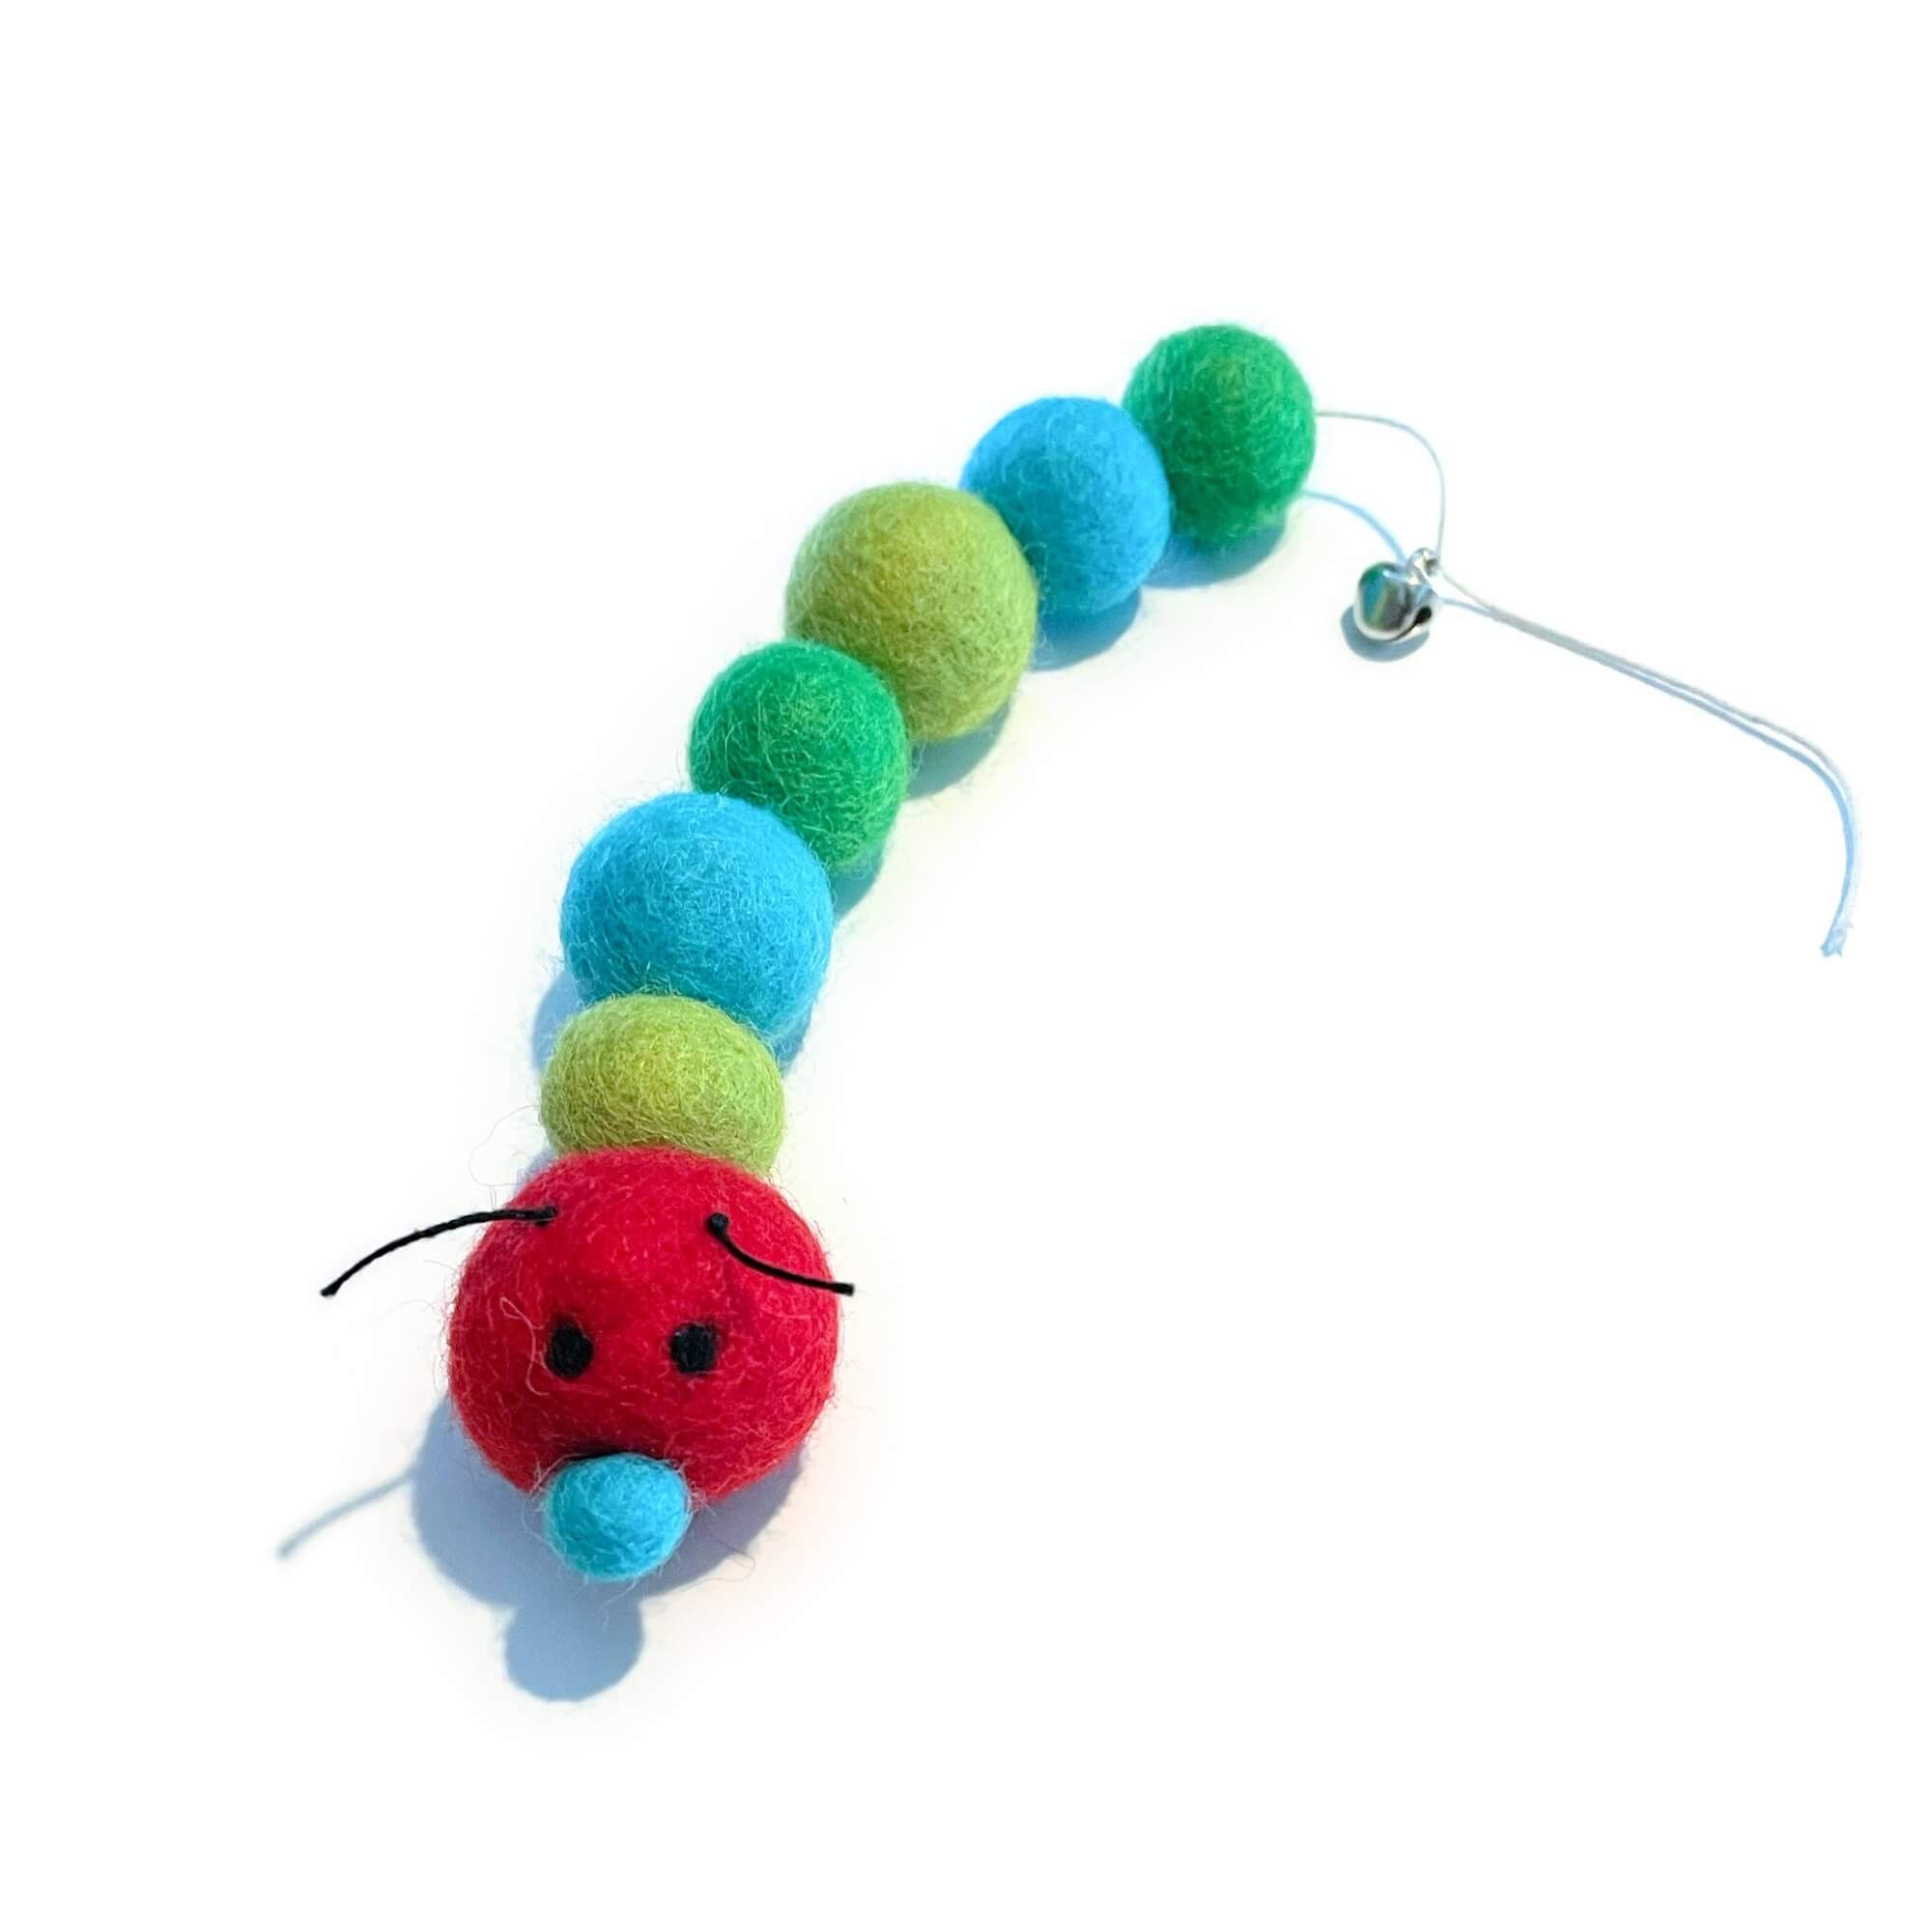 Organic wool caterpillar cat toy in red, blue &amp; green tones. Has bell at the end of its tail.